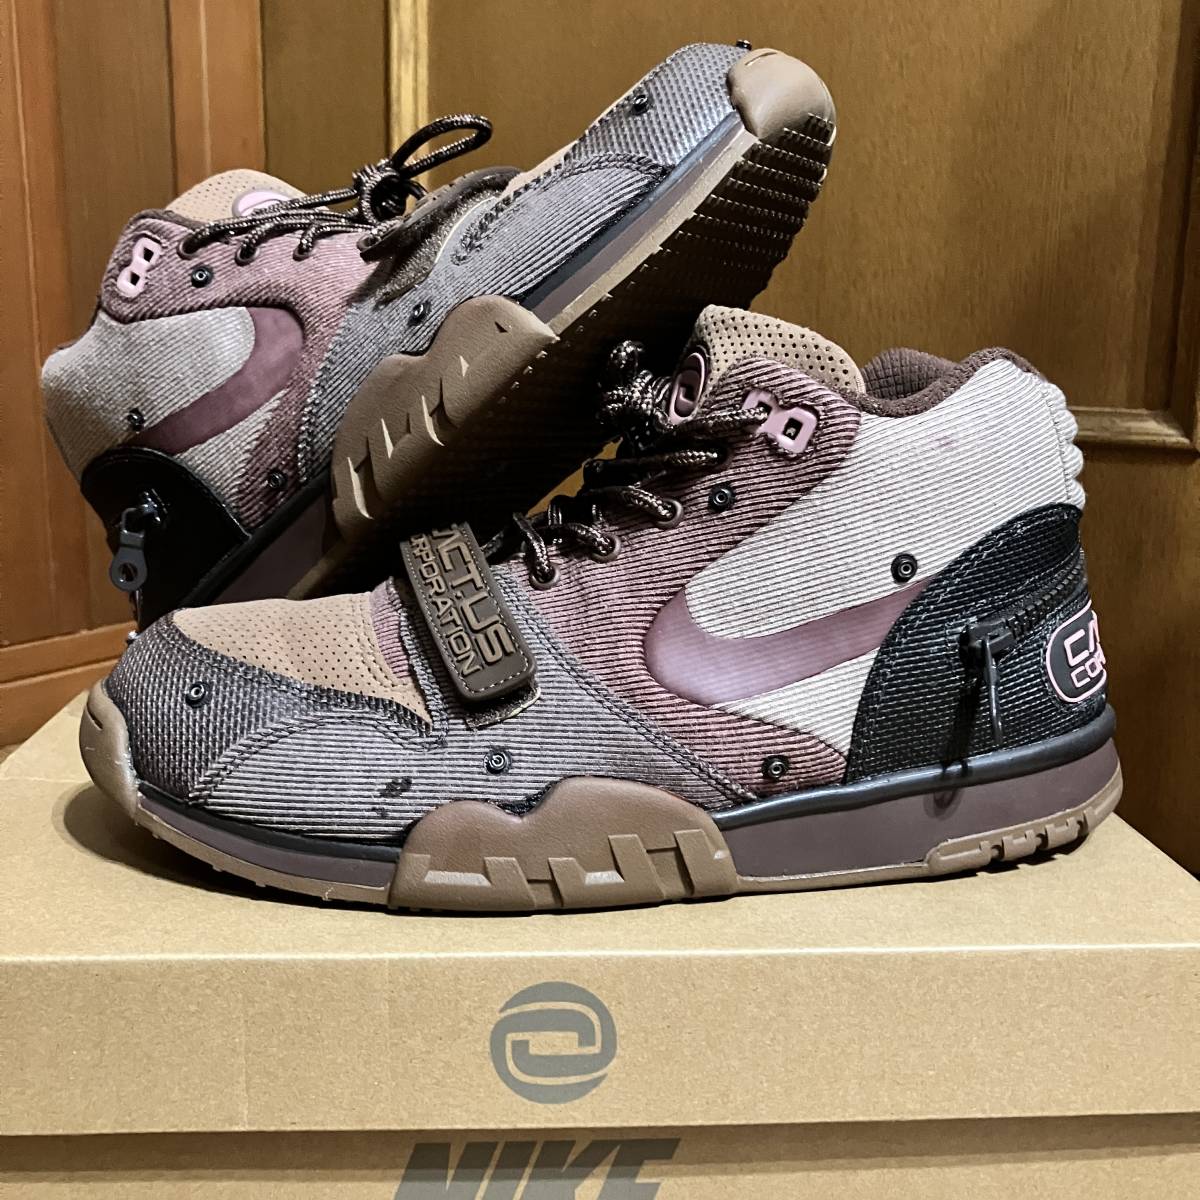 Travis Scott x Nike Air Trainer 1 SP Archaeo Brown and Rust Pink